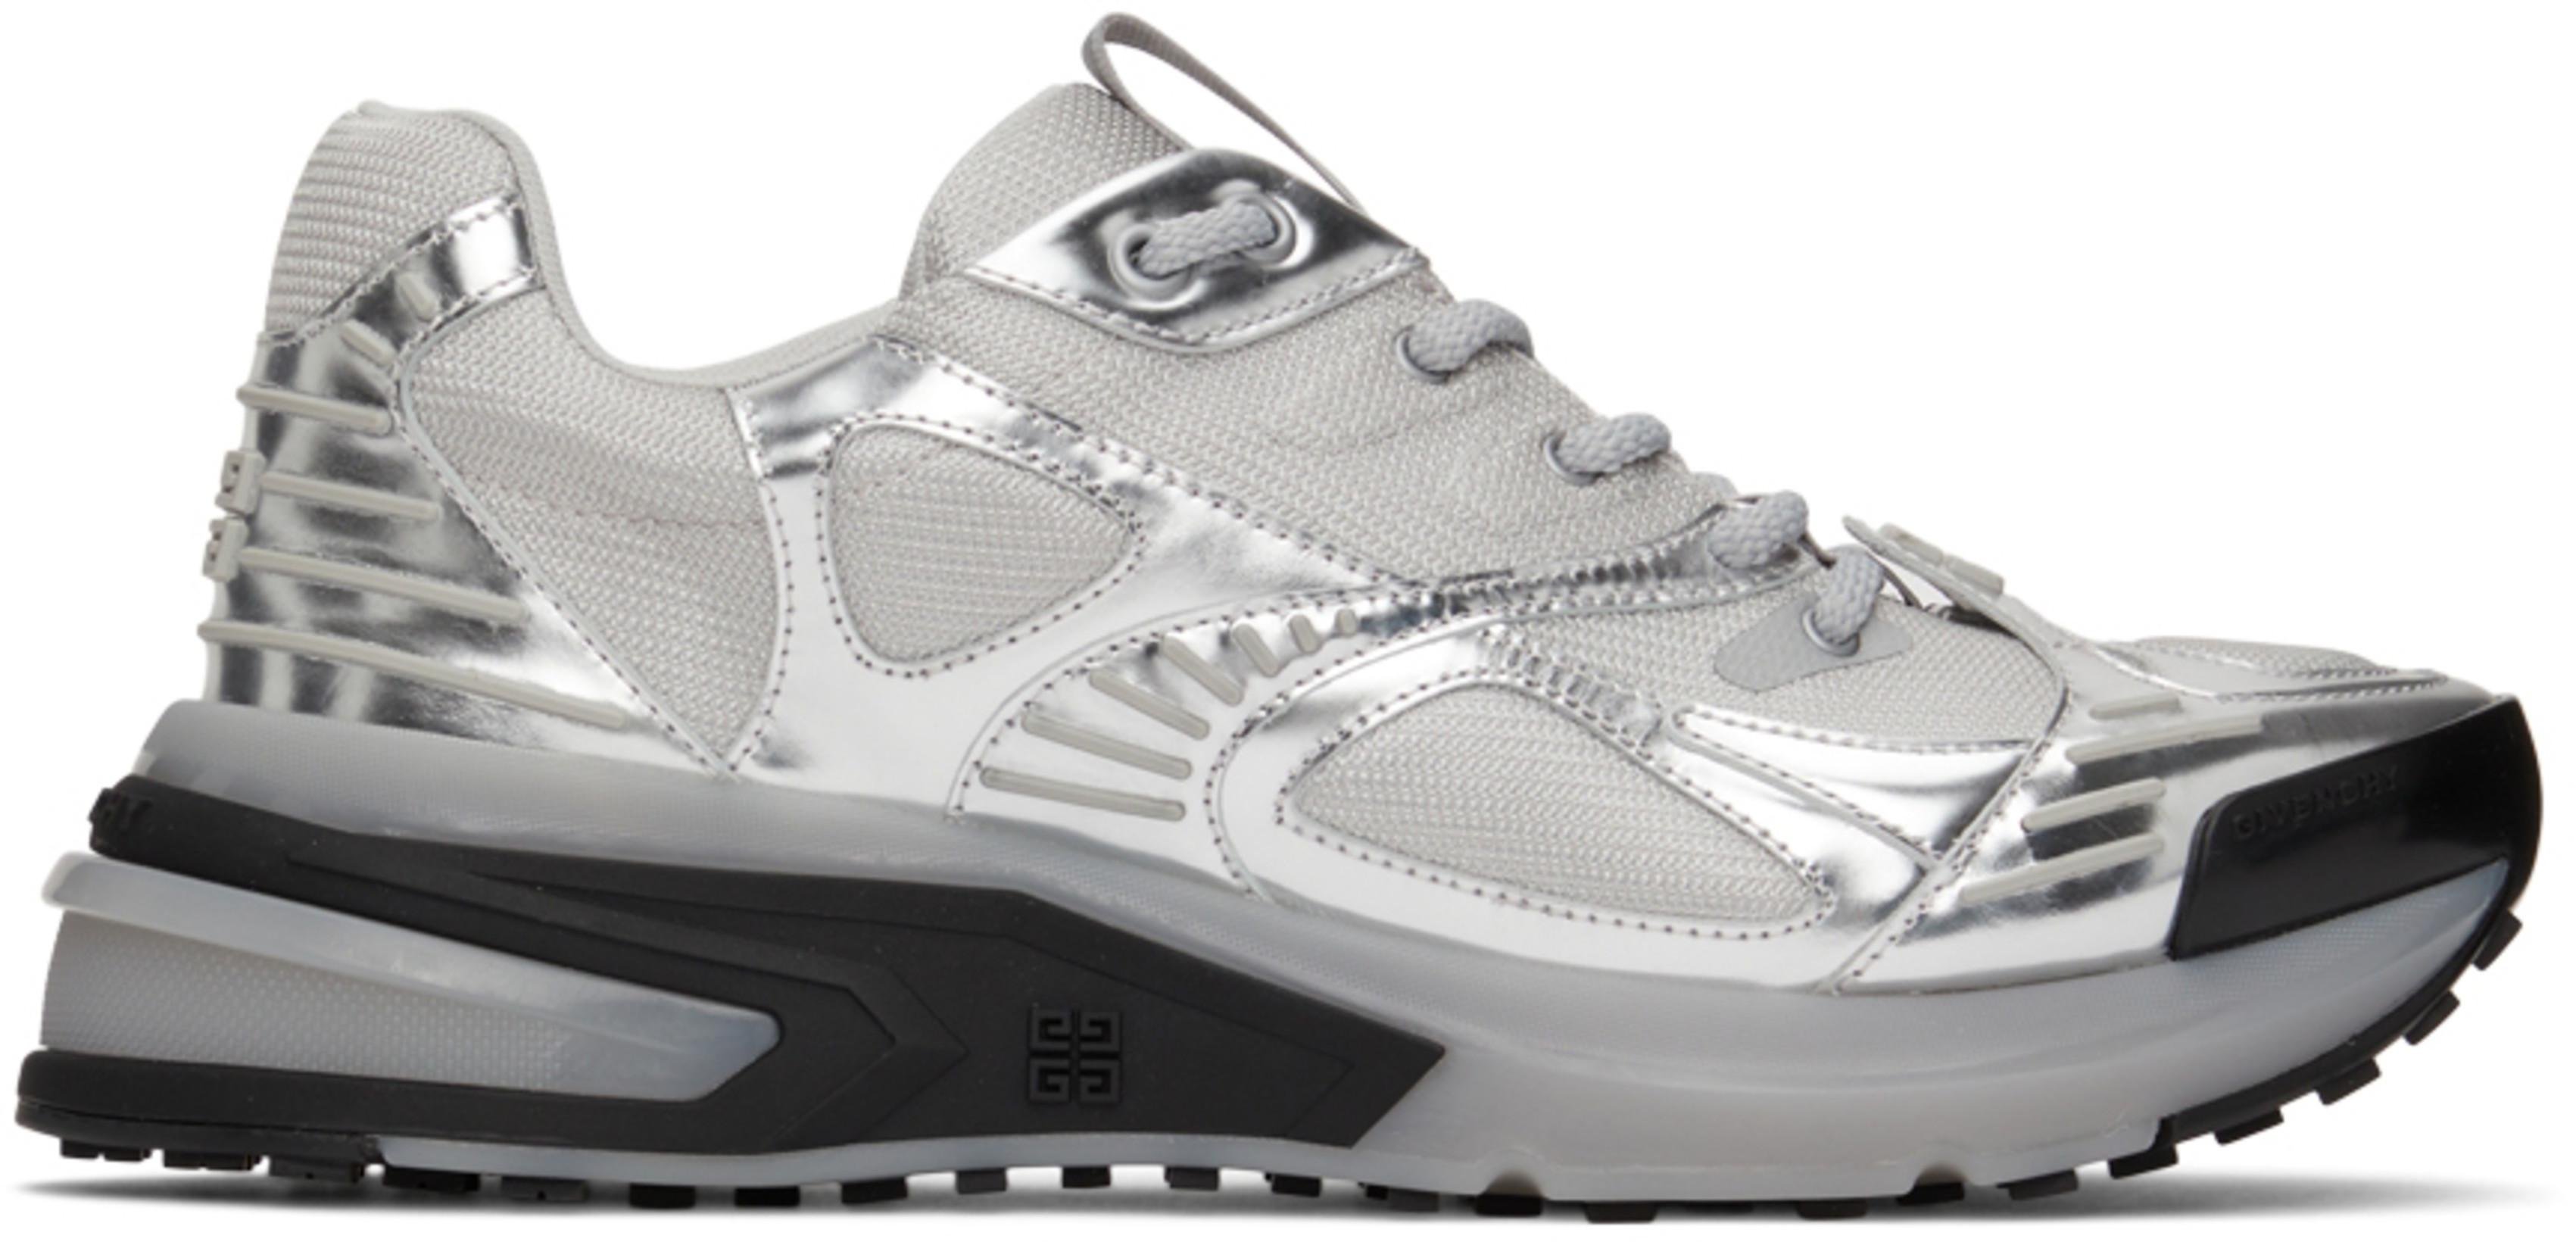 Grey & Silver GIV 1 TR Sneakers by GIVENCHY